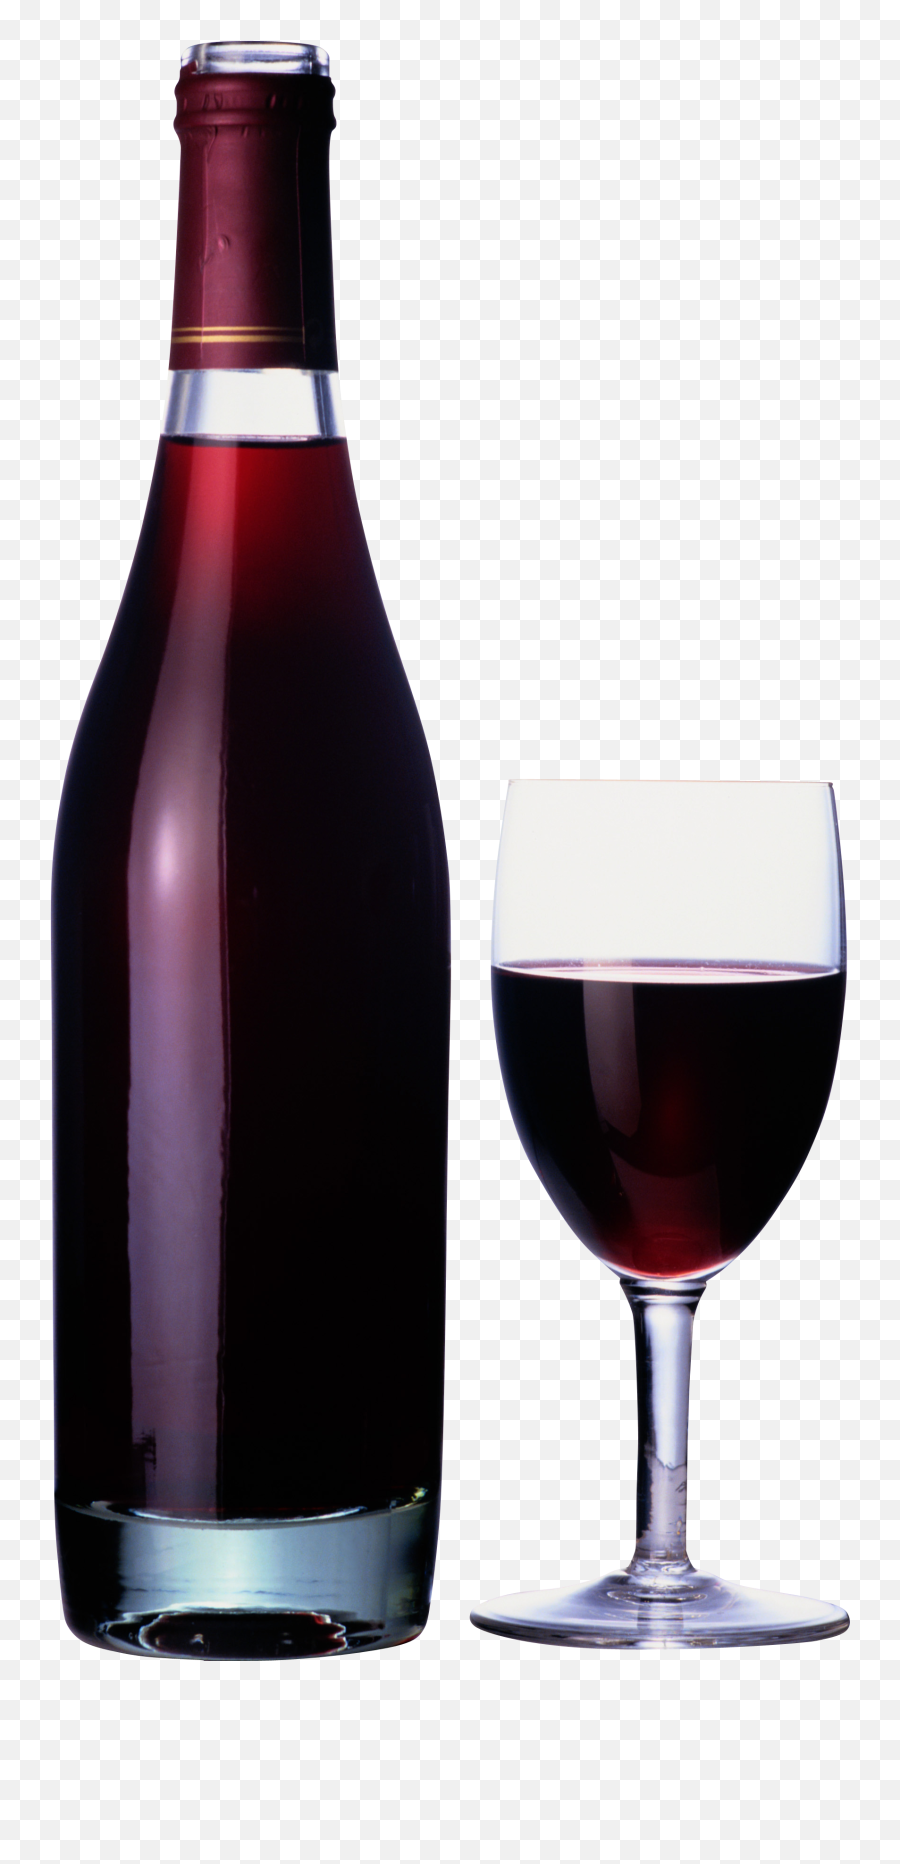 Wine Champagne Pinot Noir Bottle - Wine Glass Bottle Png Png Emoji,Bottle Of Wine Up Next To A Wine Glass Emoticon